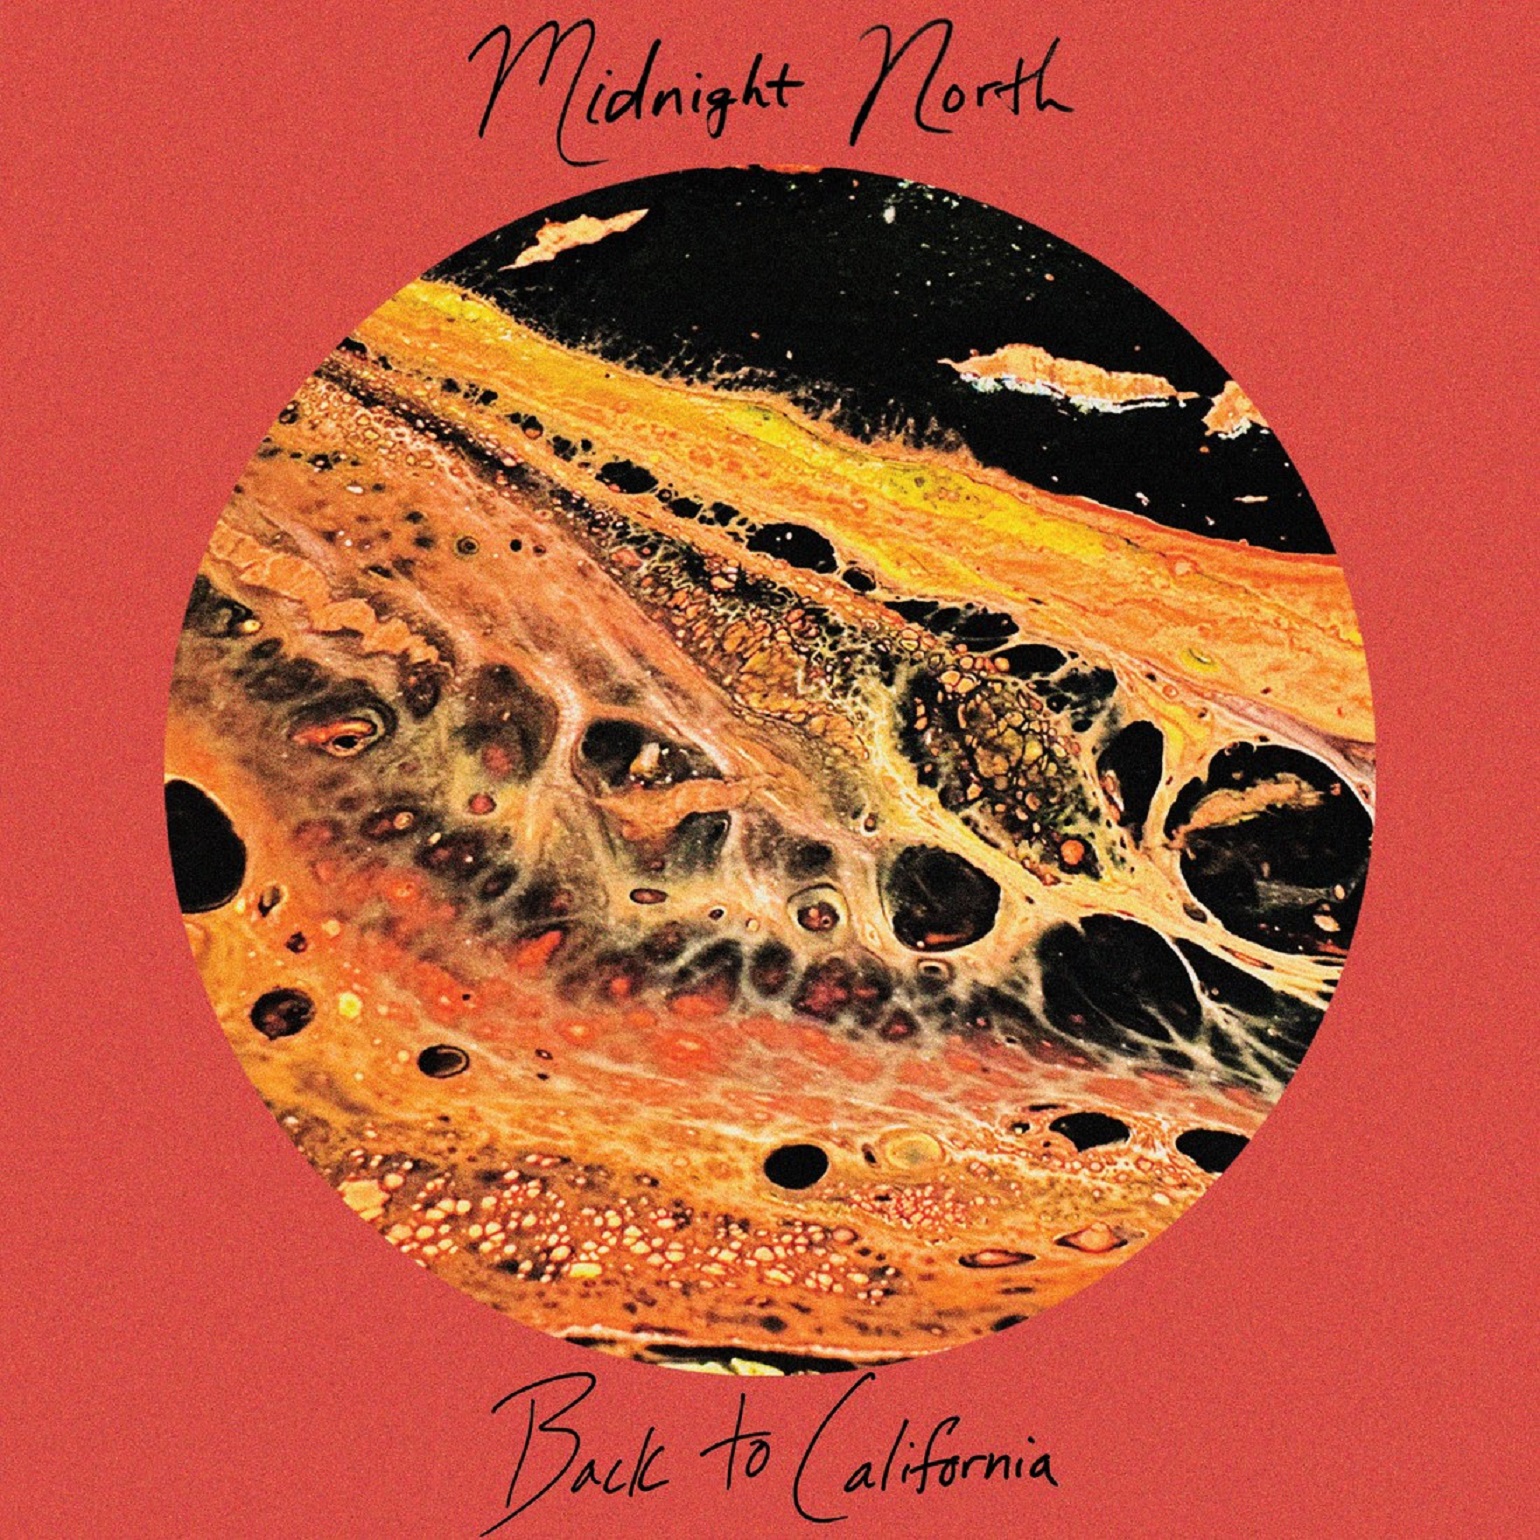 Midnight North Reflects on their Rich Bay Area Musical Roots and Journey as Musical Troubadours in New Single "Back to California"